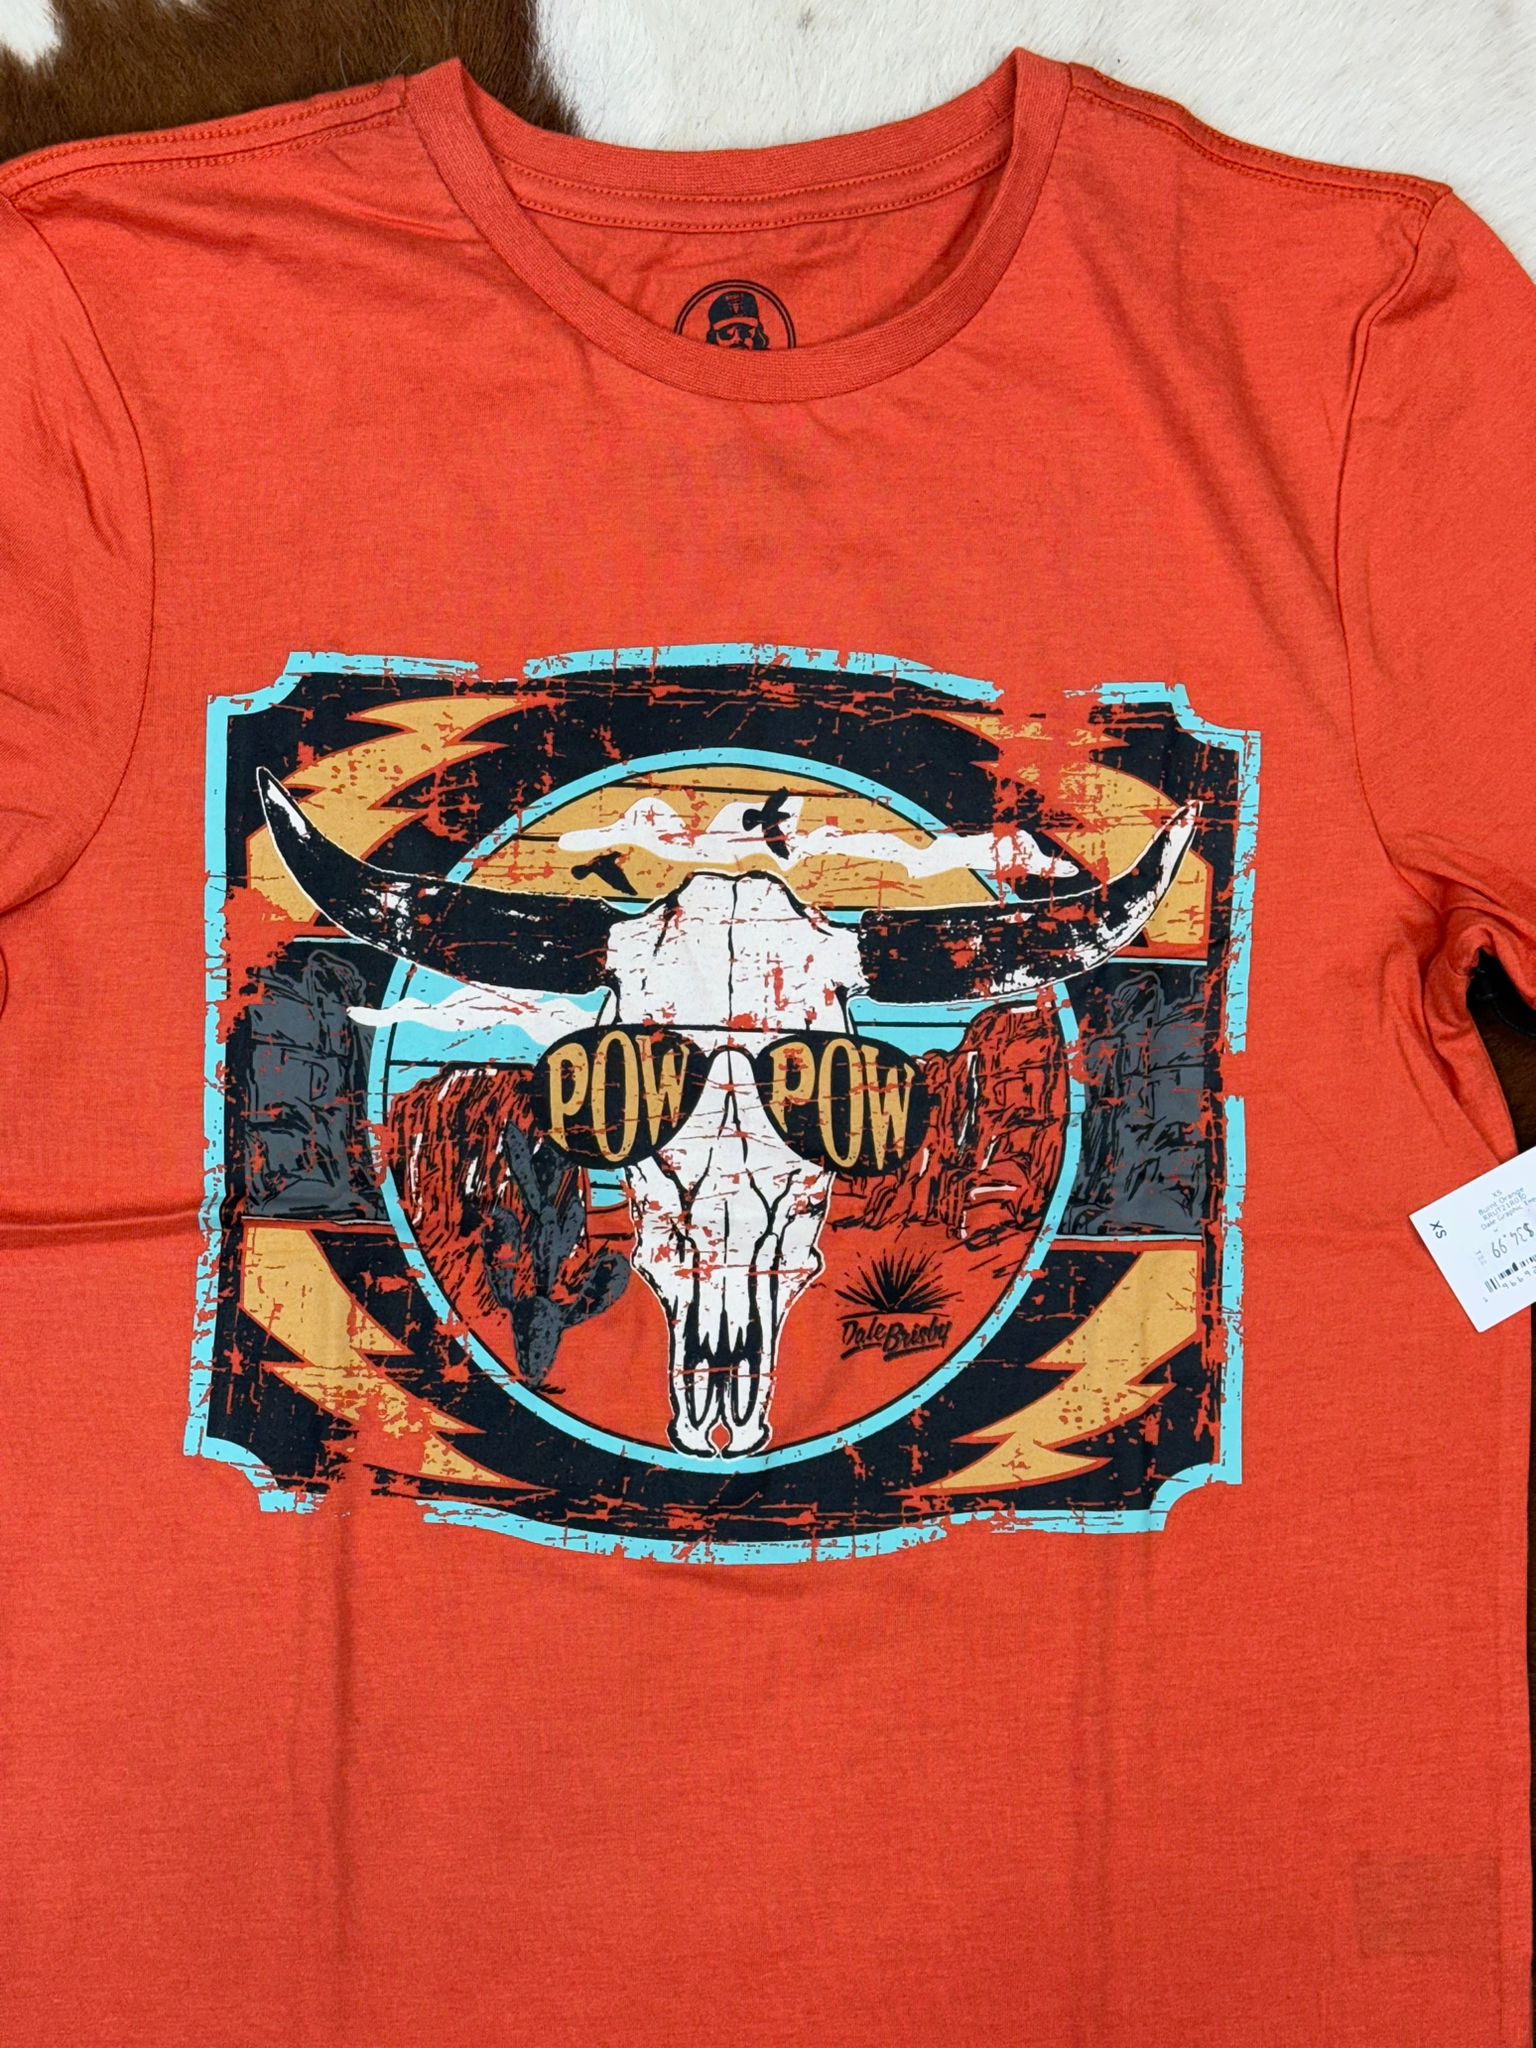 DALE BRISBY X ROCK&ROLL GRAPHIC TEE BURNT ORANGE SHORT SLEEVE T-SHIRT